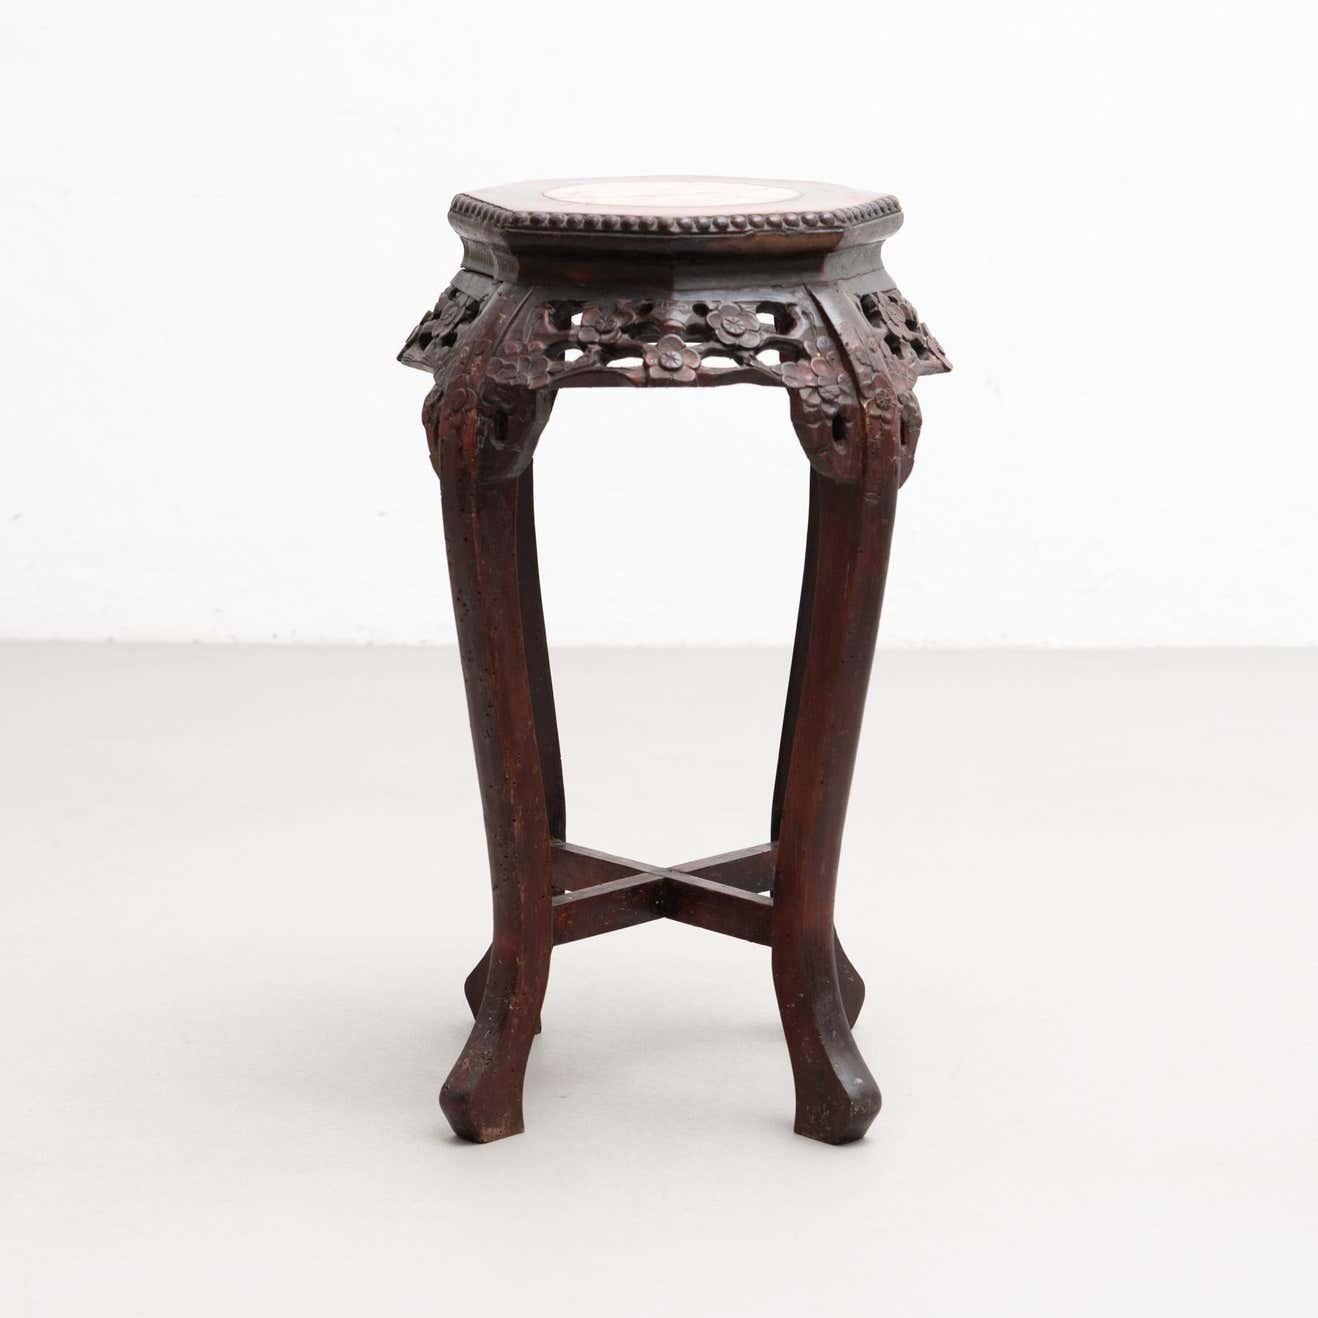 Side wood and marble oriental table, circa 1930.

By unknown artisan.

In original condition, with minor wear consistent with age and use, preserving a beautiful patina.

Materials:
Marble
Wood.

